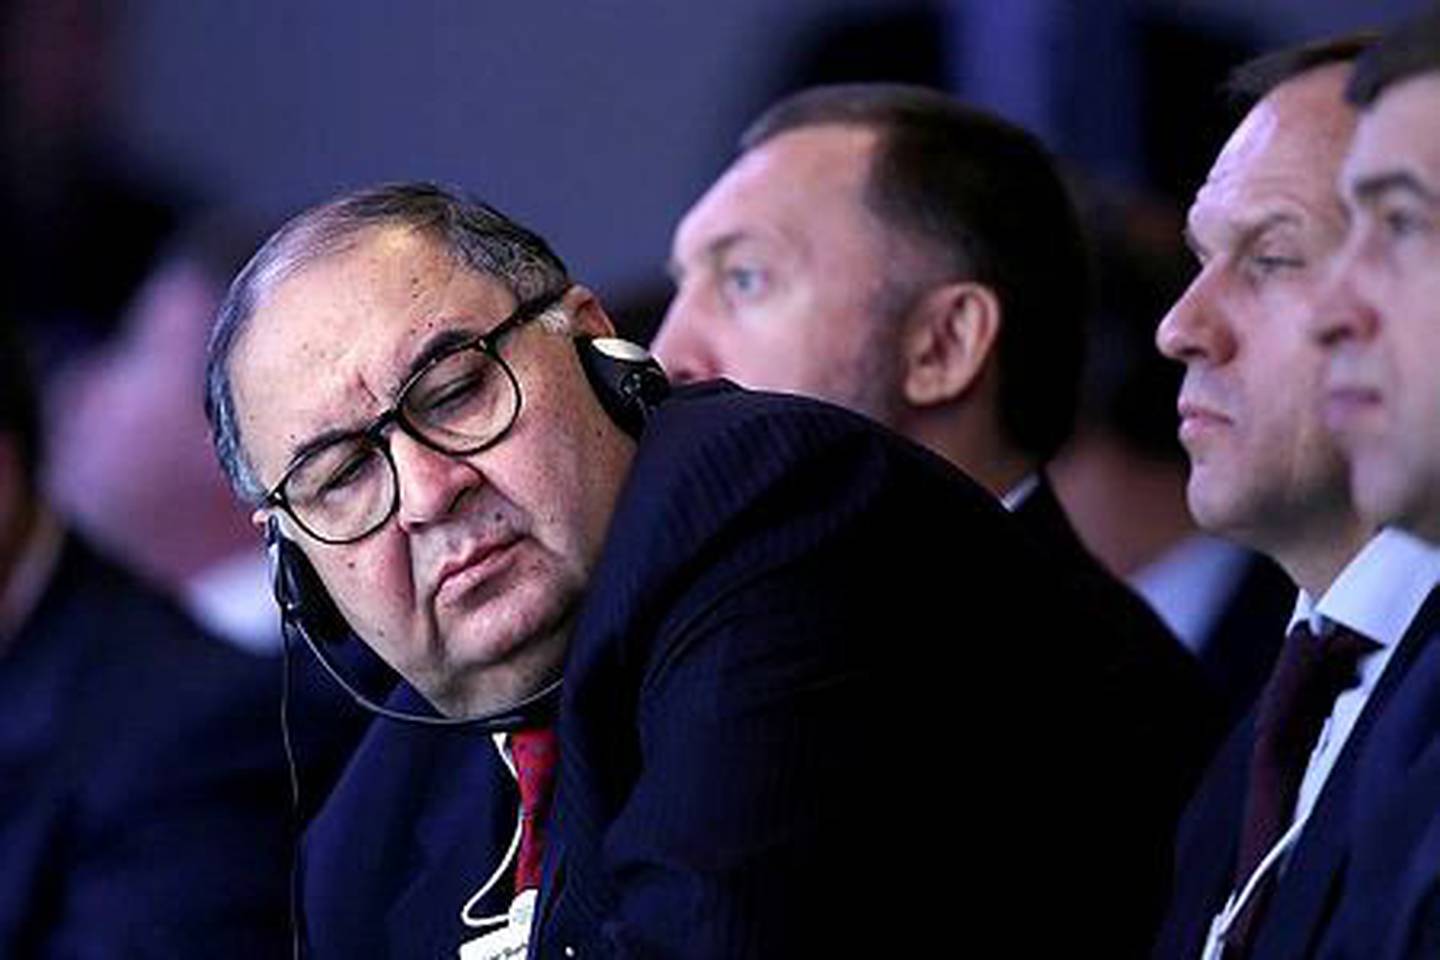 Also not on the sanctions list is Alisher Usmanov, a Russian metals tycoon who was an early investor in Facebook. His fortune is estimated at more than $14 billion. Bloomberg